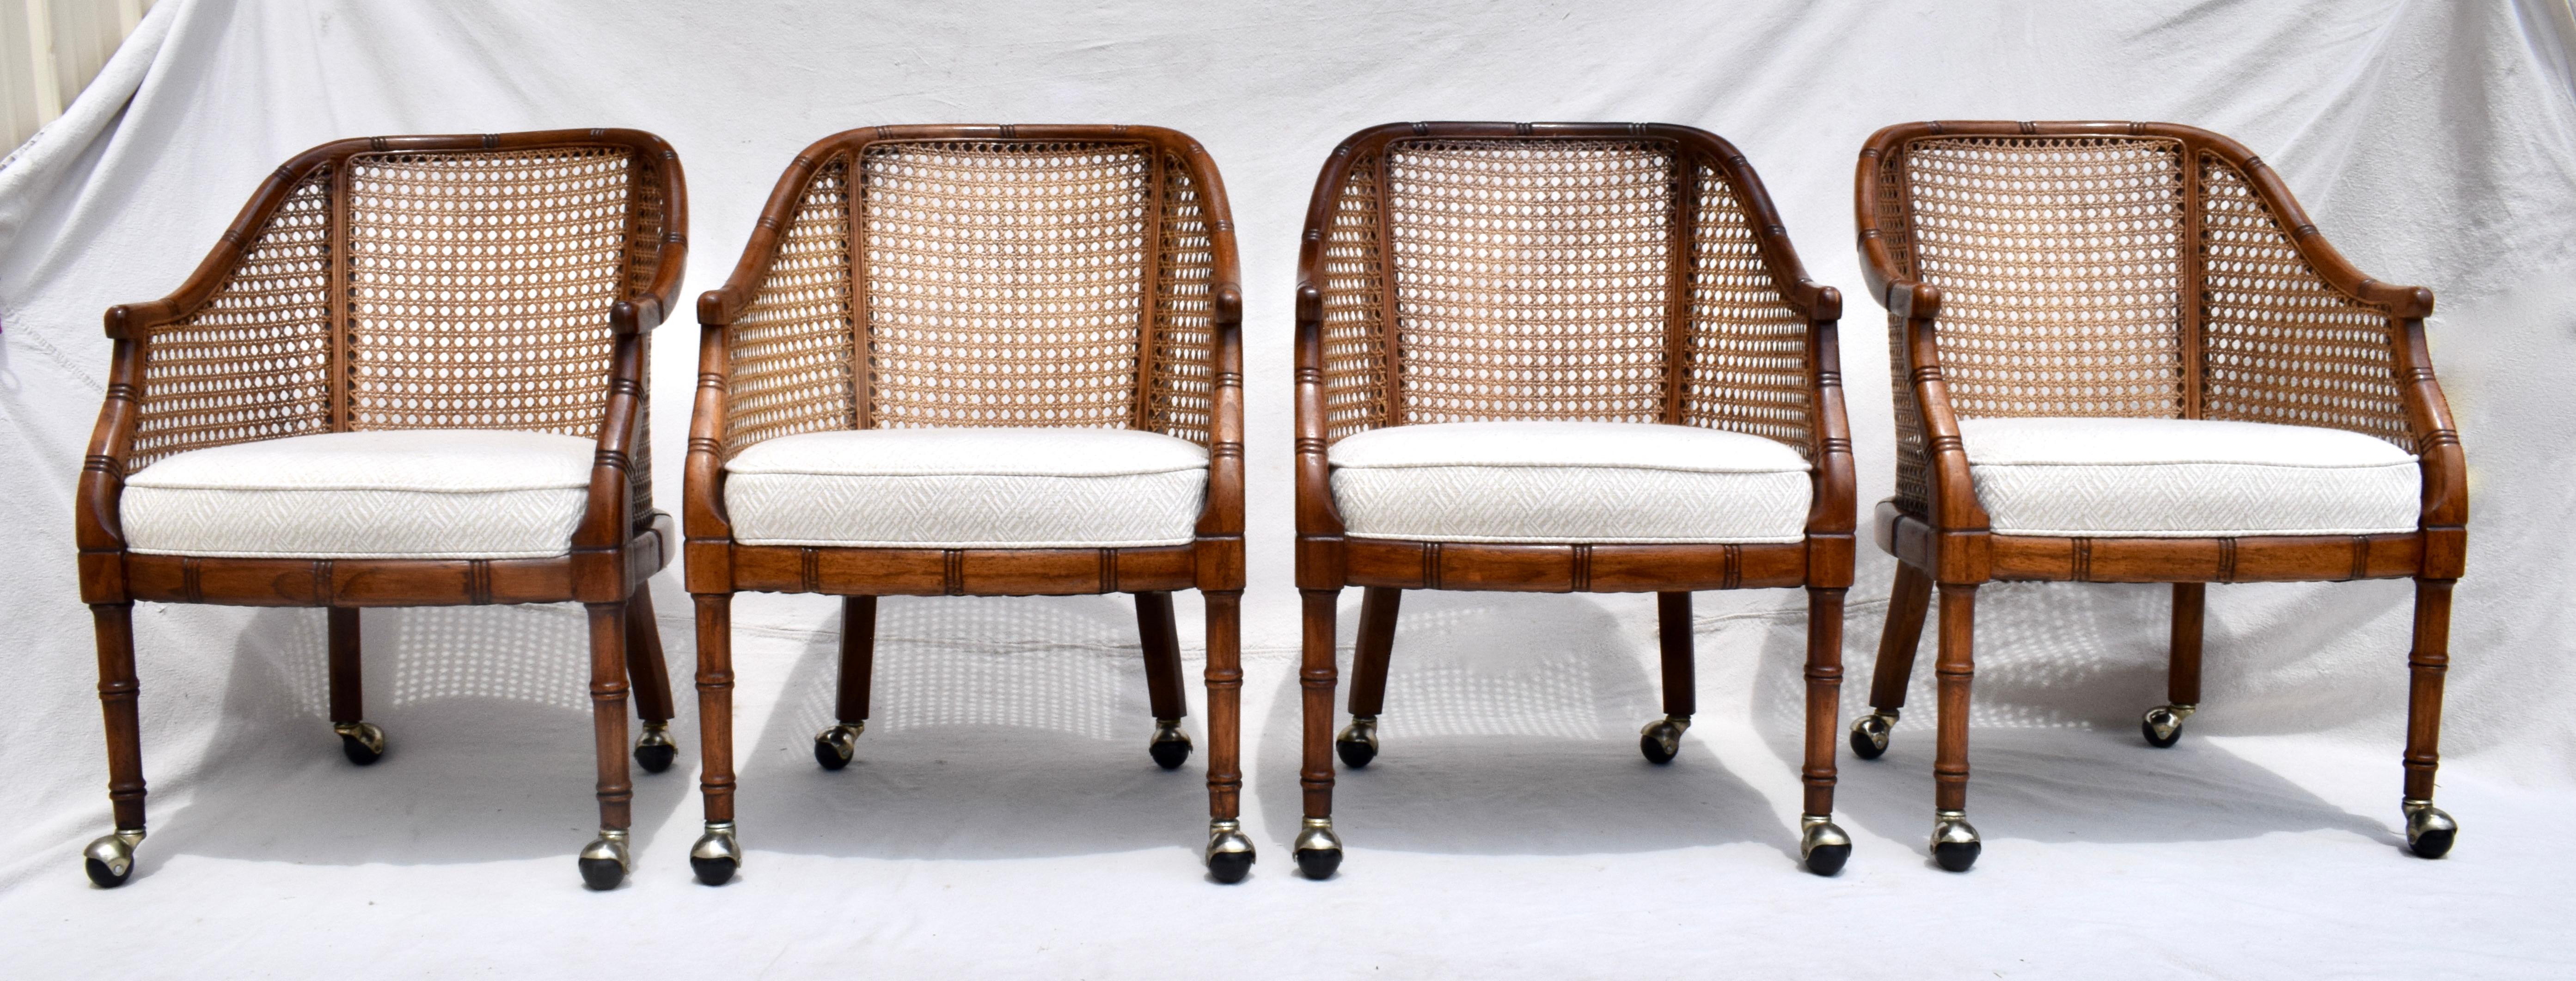 Exceptional set of four Mid-Century Modern barrel chairs in the manner of Harvey Probber featuring faux-bamboo wooden frames on casters with caned backs and sides. The stationary seats are custom upholstered in hand loomed & textured cotton tapestry